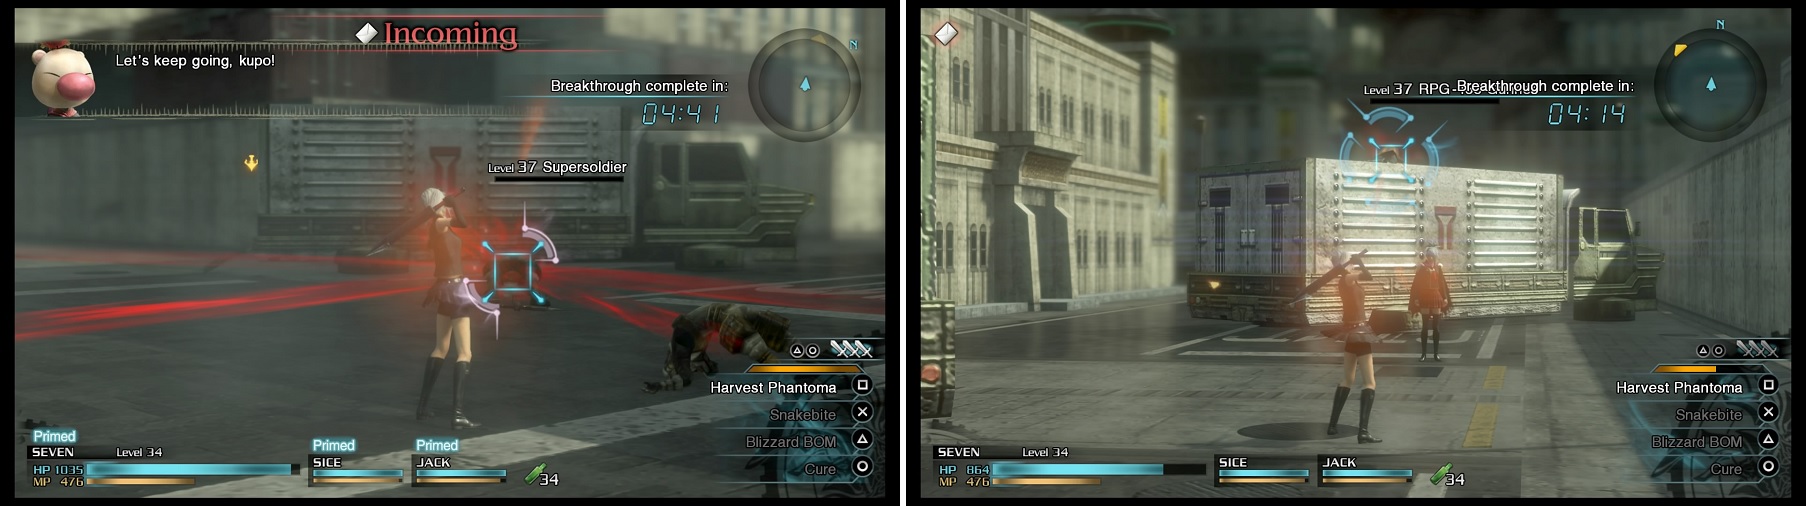 You’ll need to absorb every Phantoma you come across (left) to get the S-Rank. Make sure you keep an eye out for some RPG Gunners on the roofs of the trucks (right).